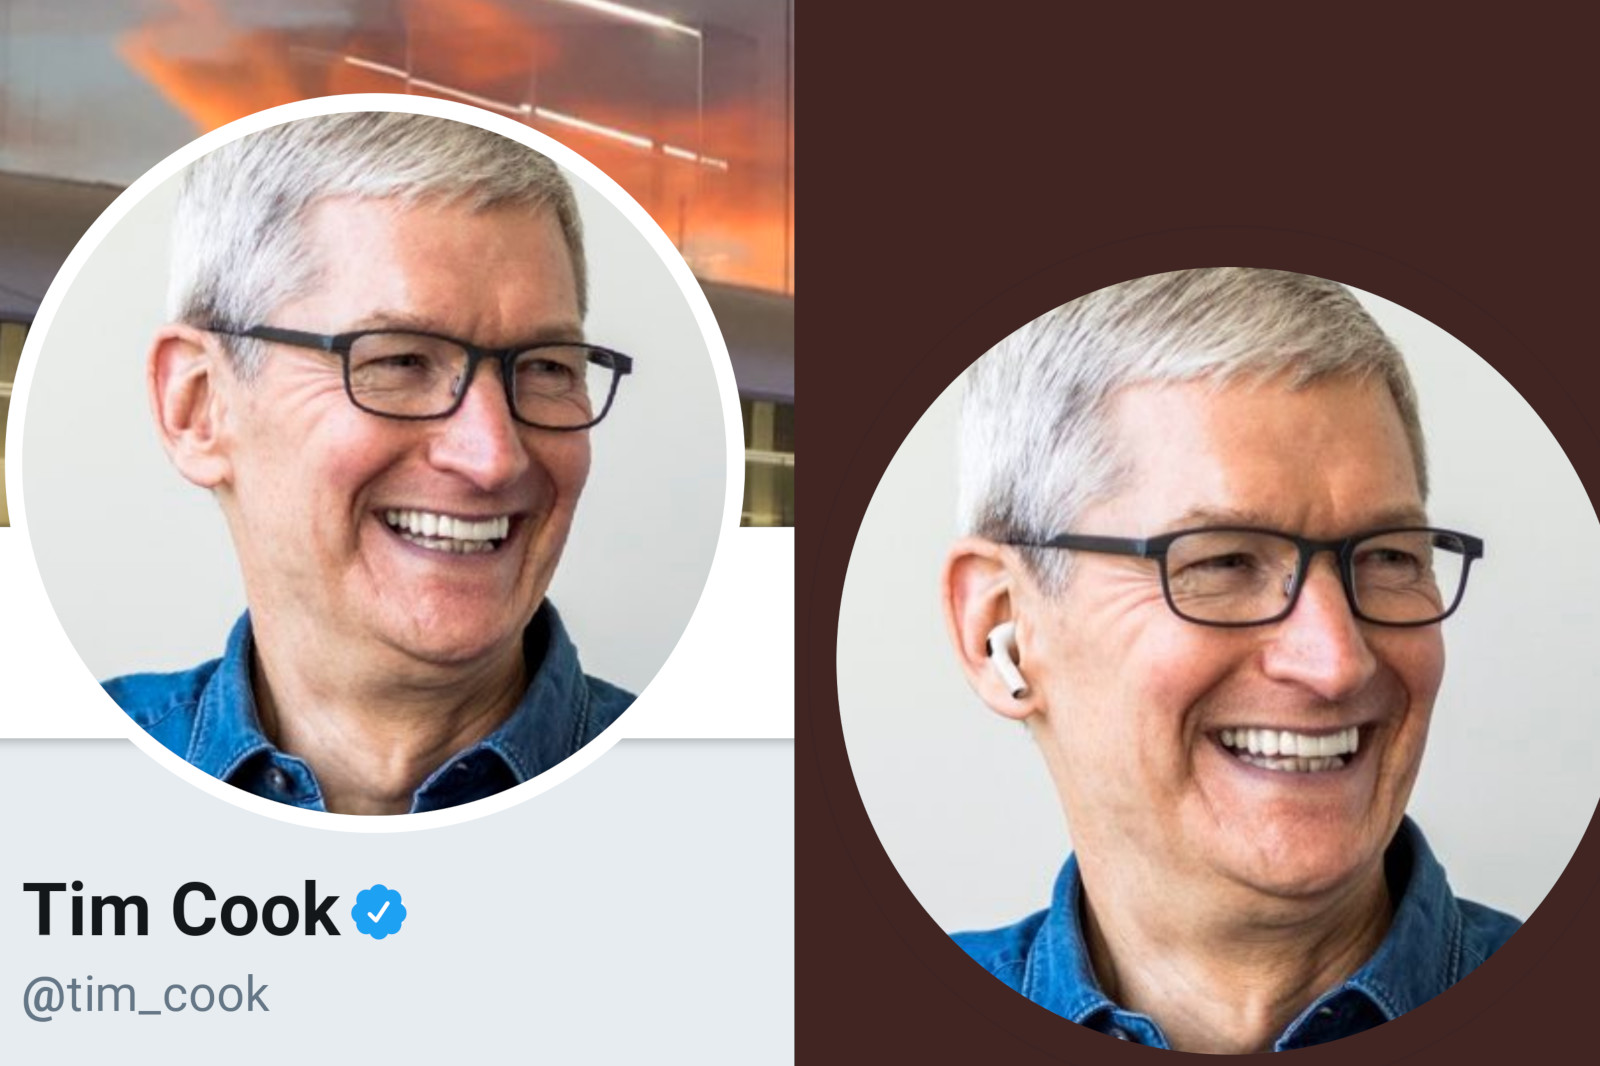 fez Apple photoshop o AirPods Pro para Tim Cook Twitter perfil?